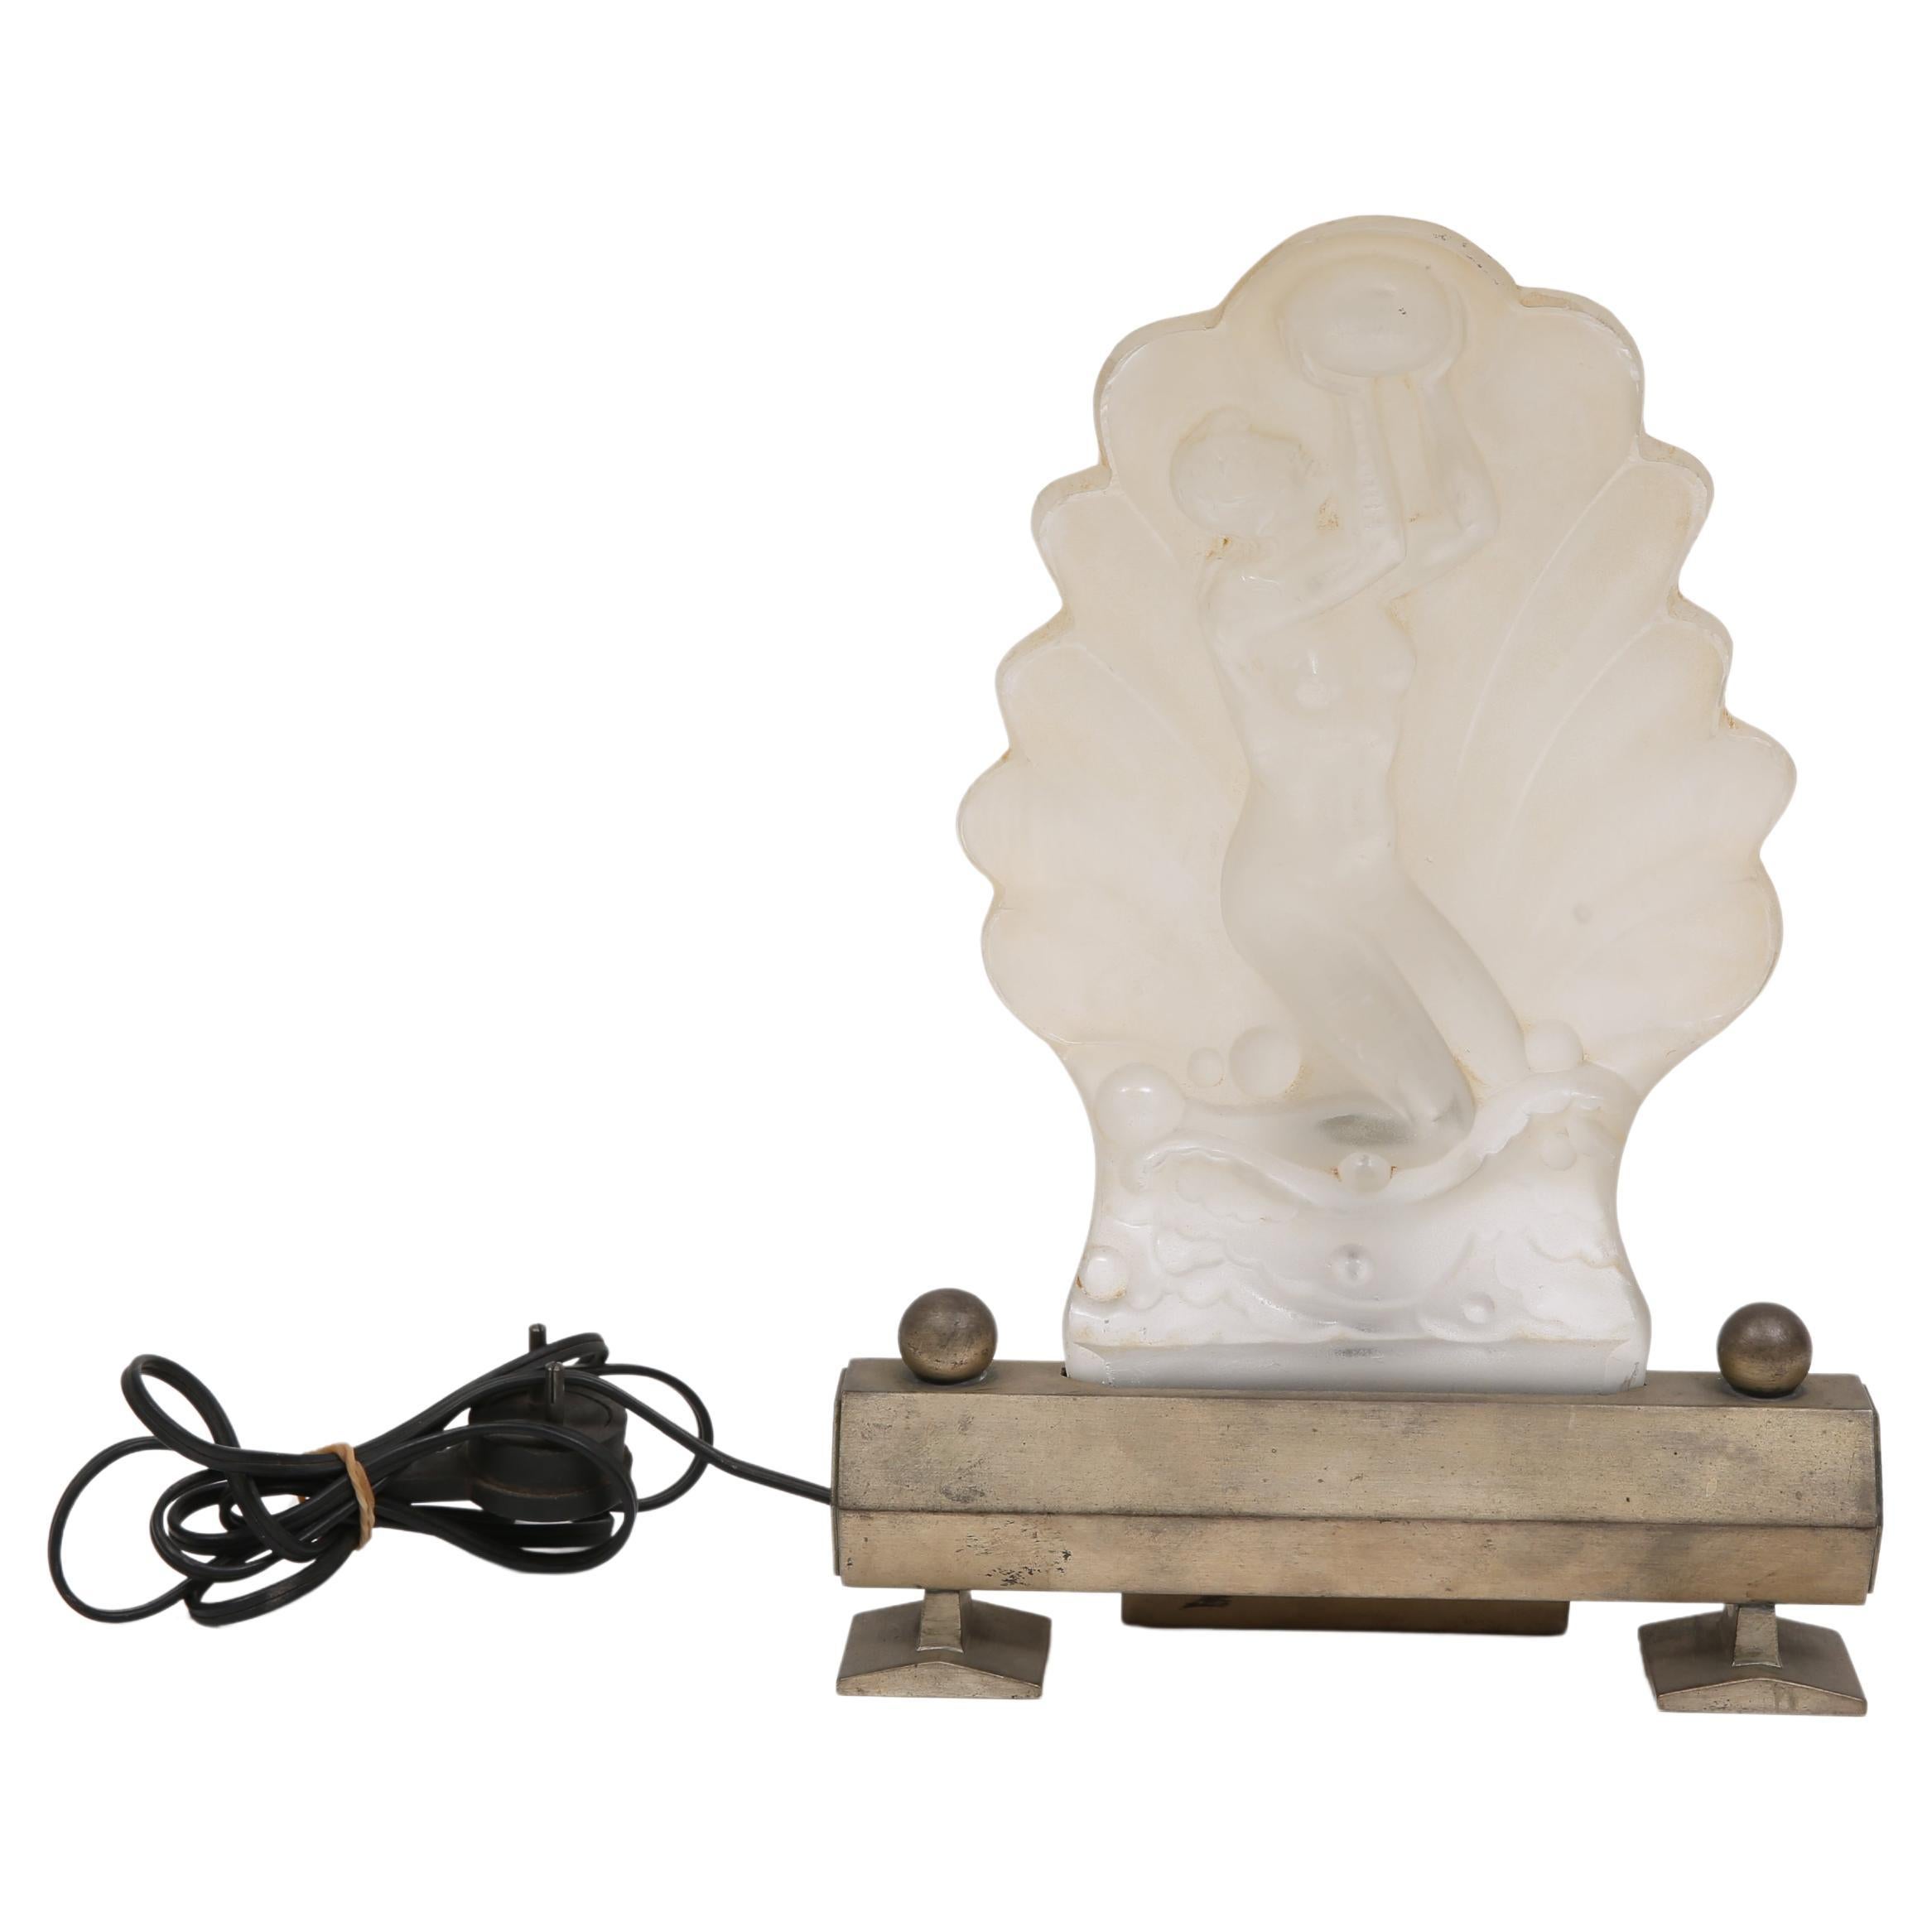 Kneeling lady with ball table lamp